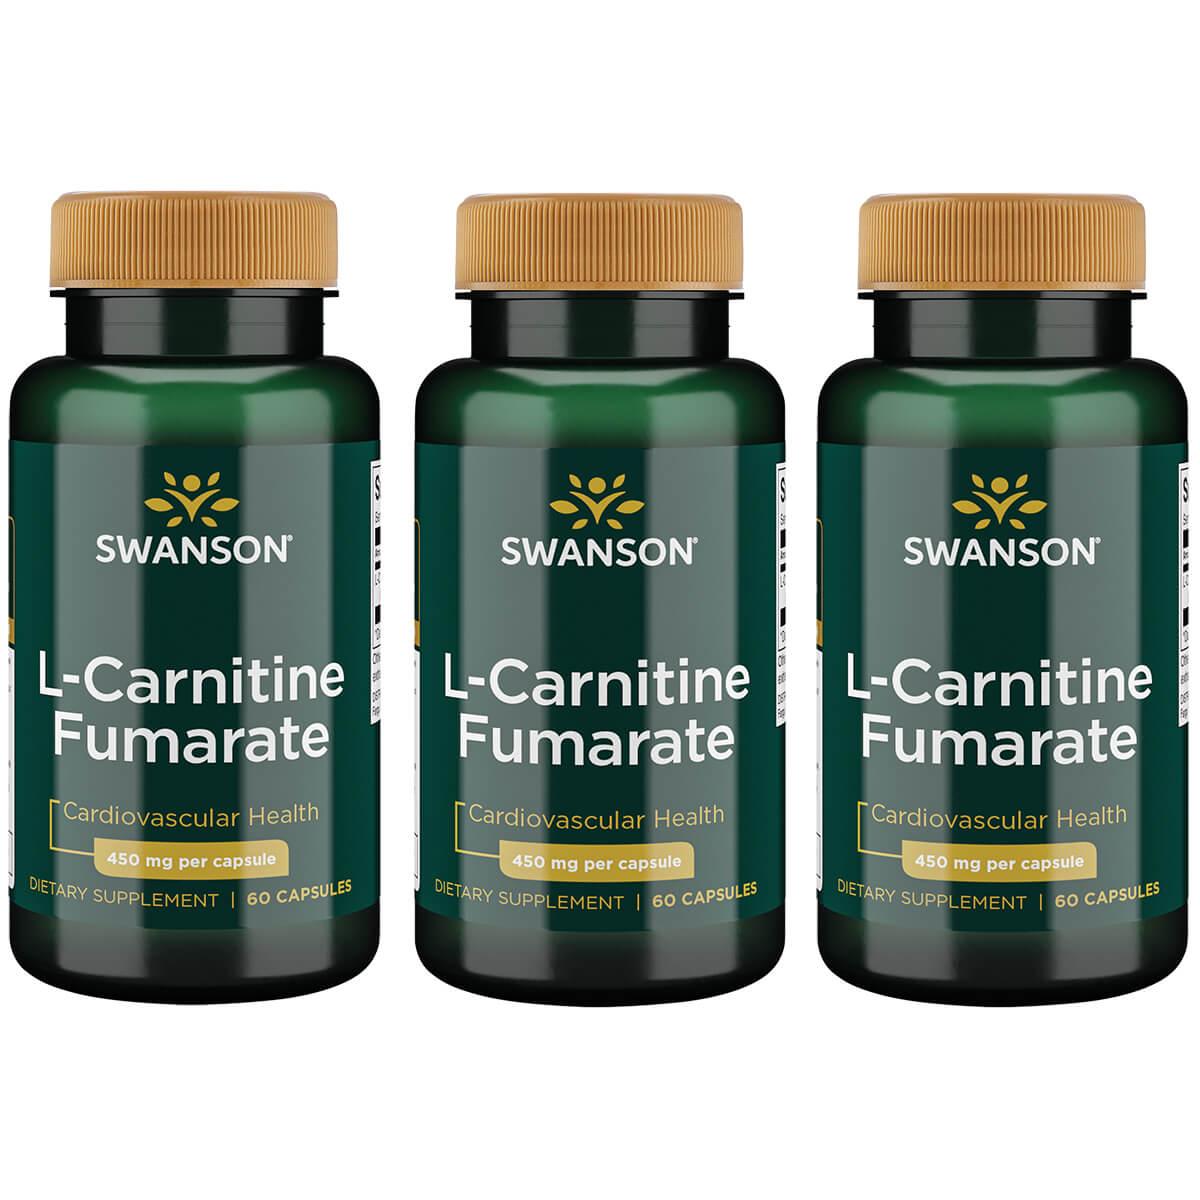 Swanson Ultra L-Carnitine Fumarate 3 Pack Supplement Vitamin 450 mg 60 Caps Weight Management